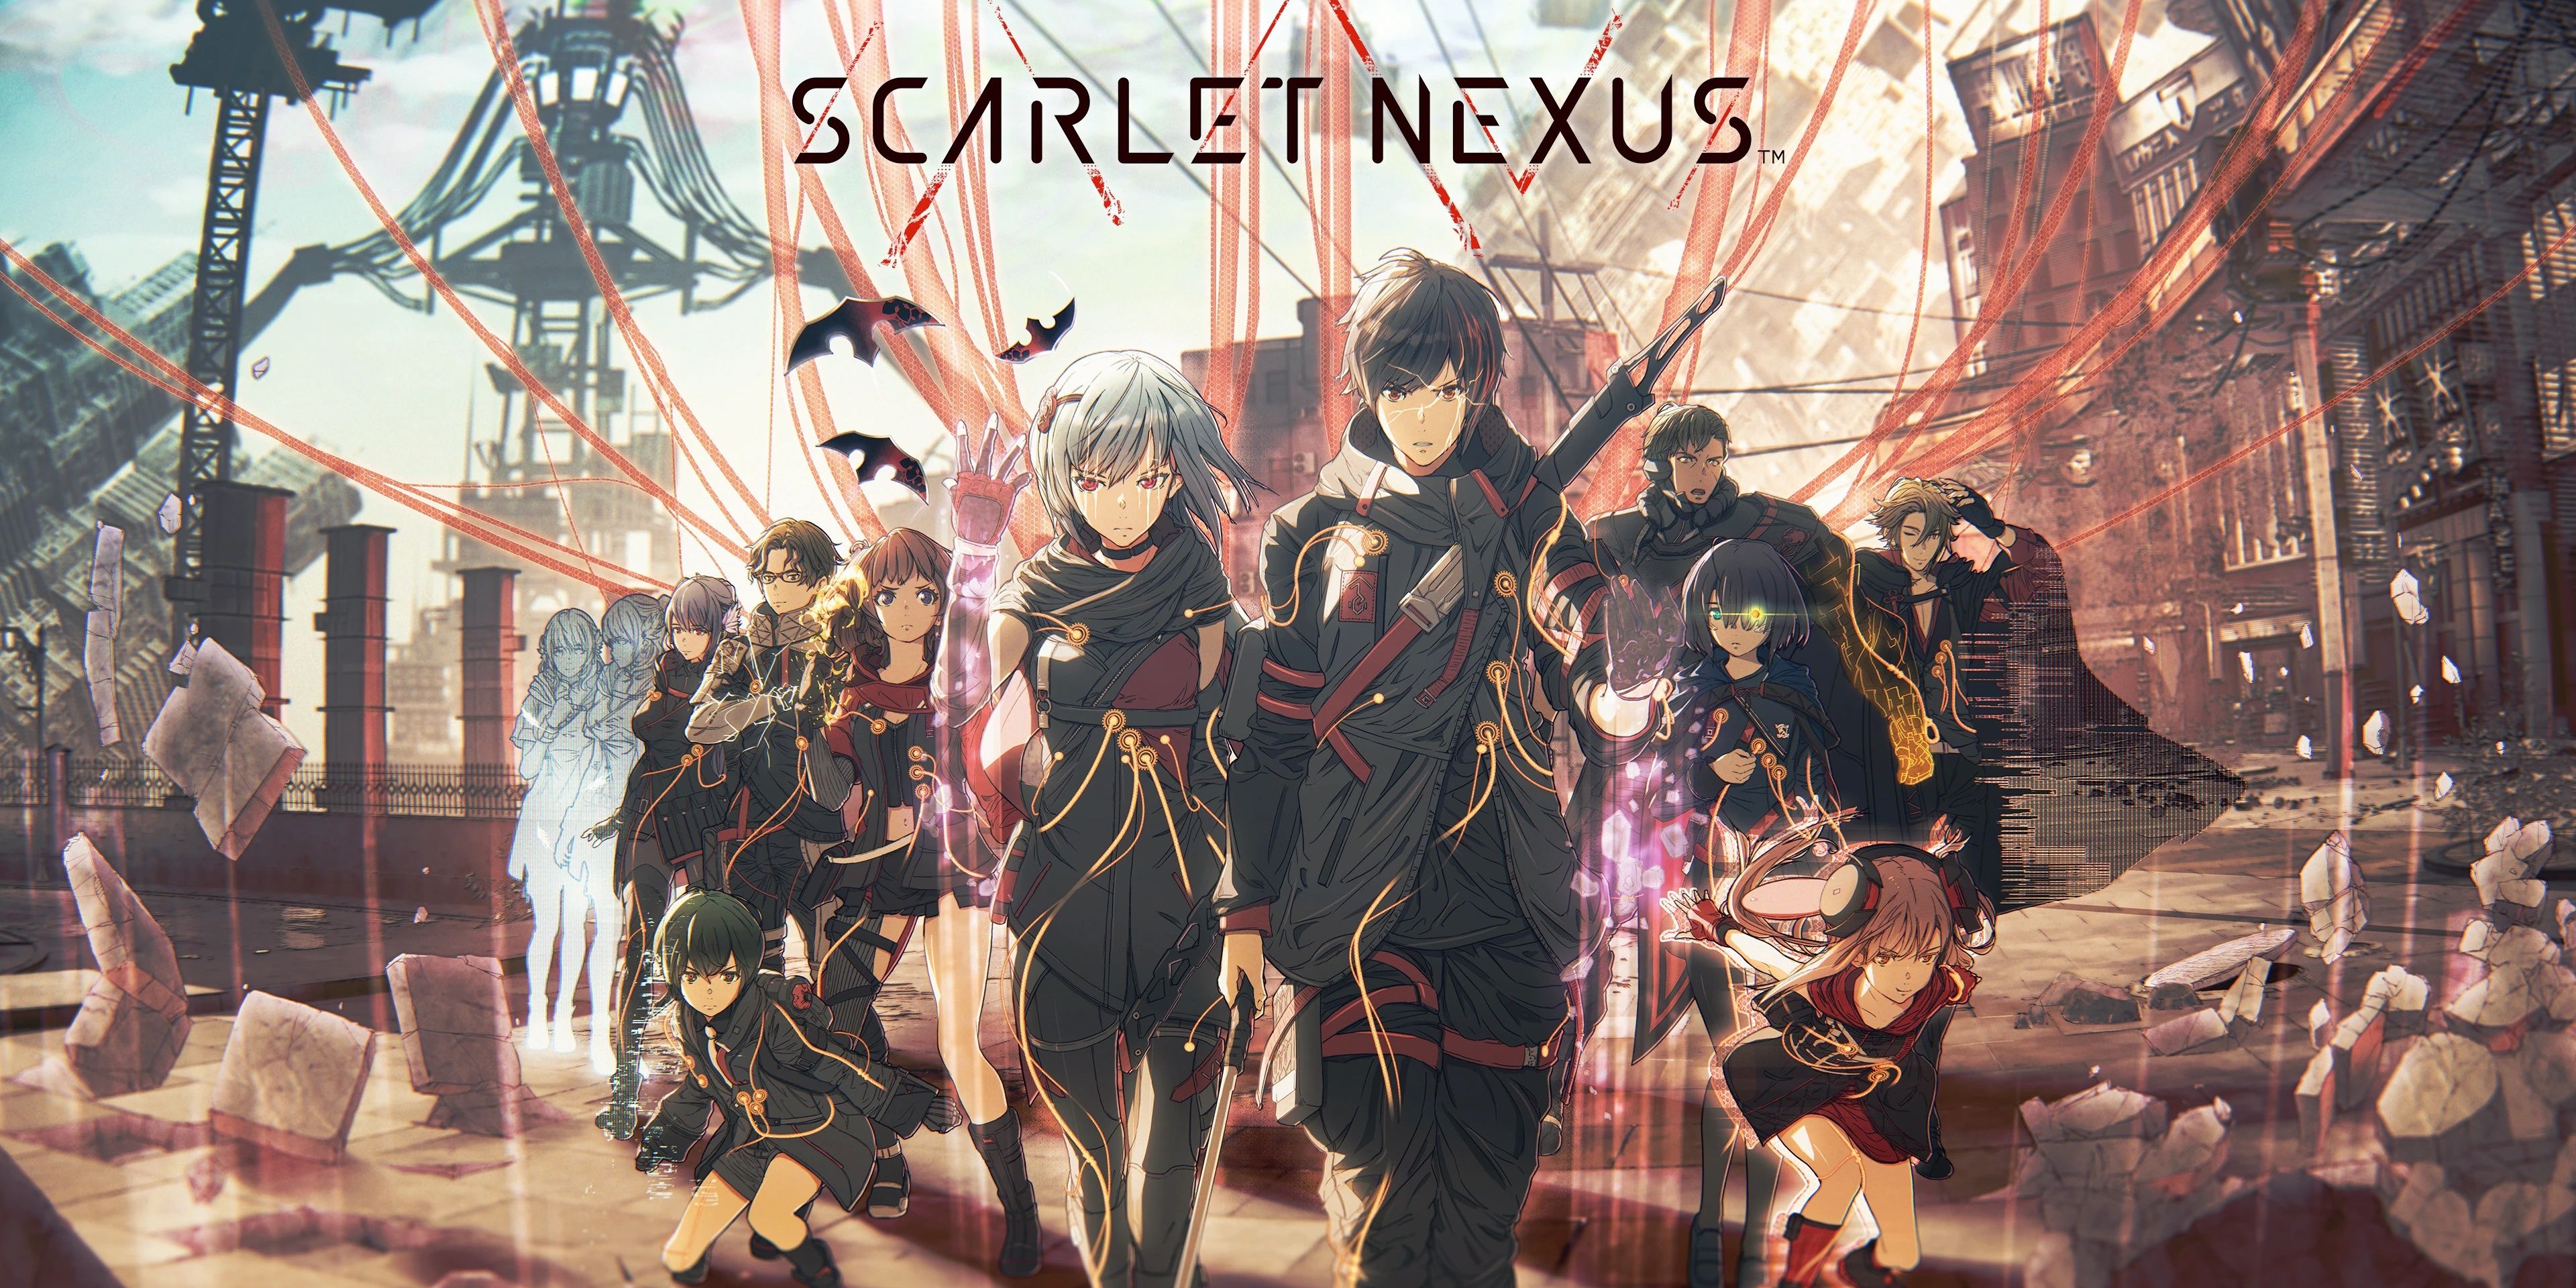 Scarlet Nexus arrives in June, and it's getting an anime